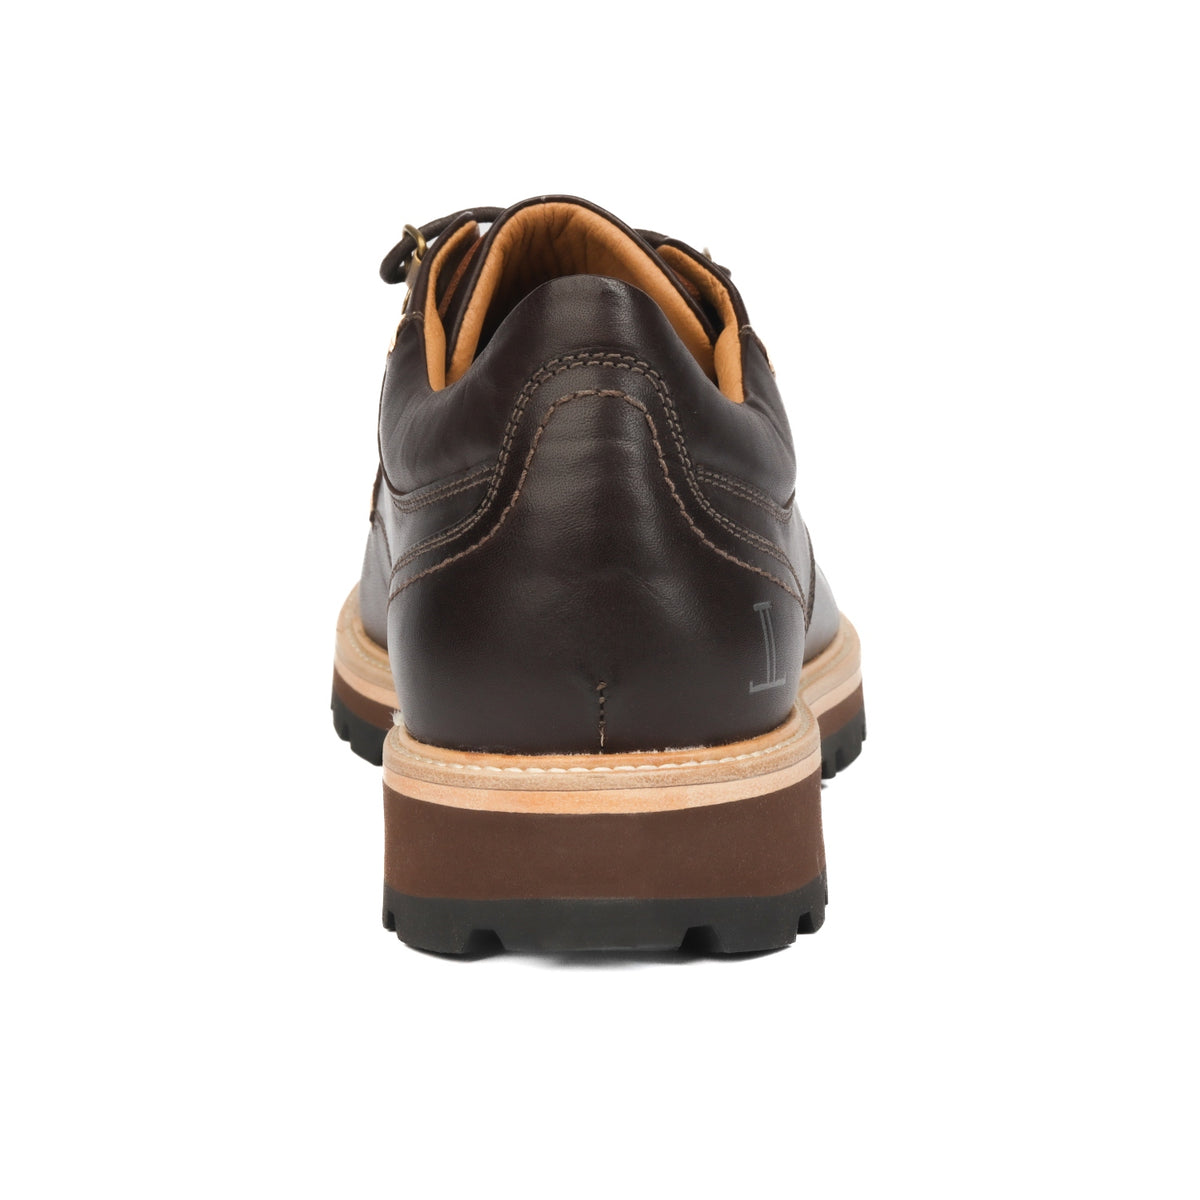 Lucchese | Ranger II Moccasin Oxford Boot | Chocolate 12